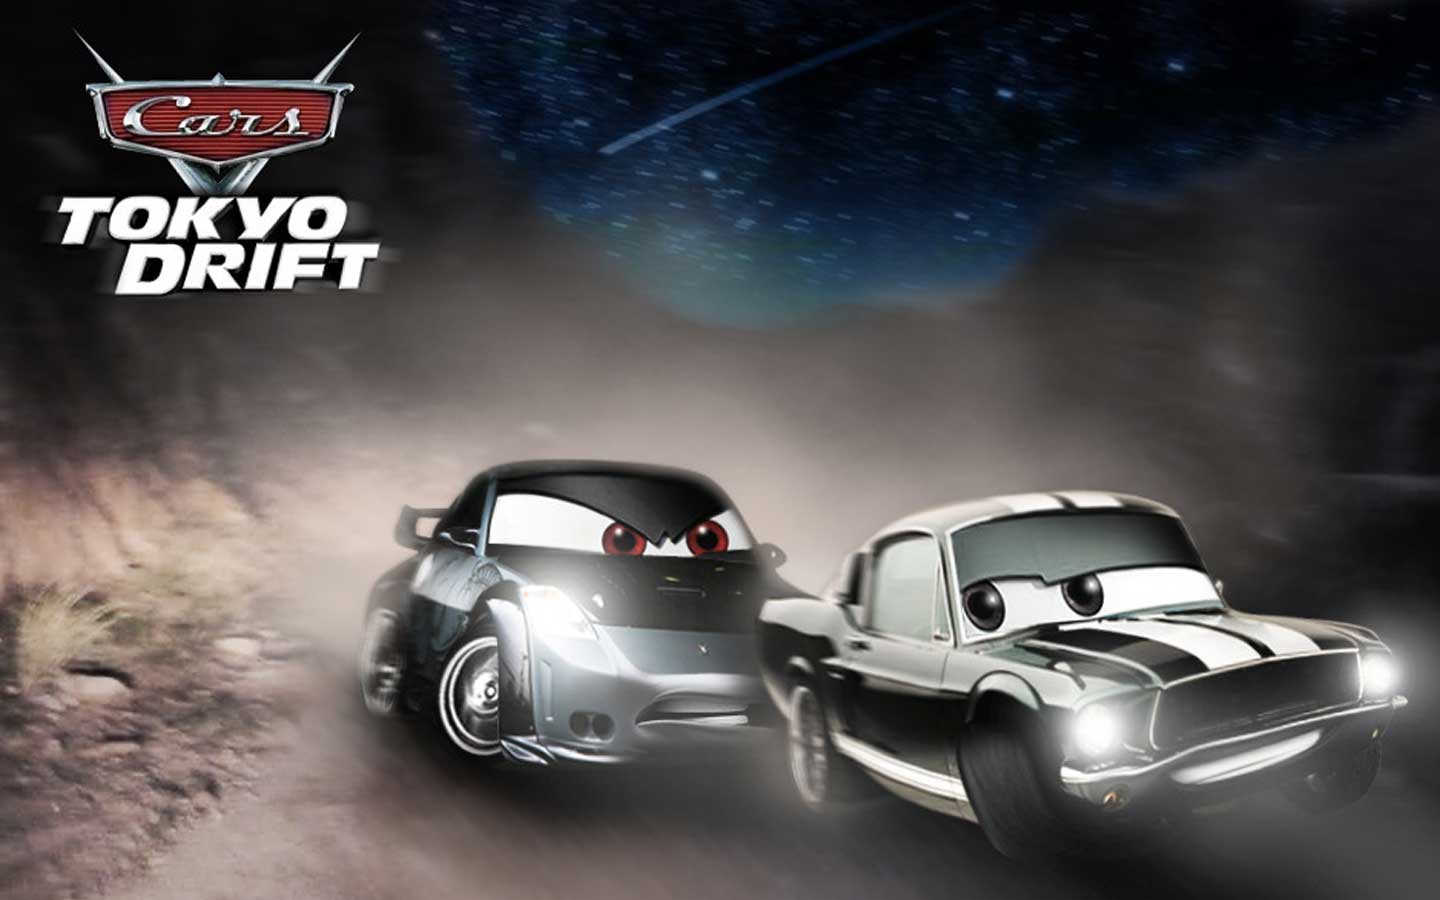 Tokyo Drift Cars Wallpapers 5923 Hd Wallpapers in Cars   Imagescicom